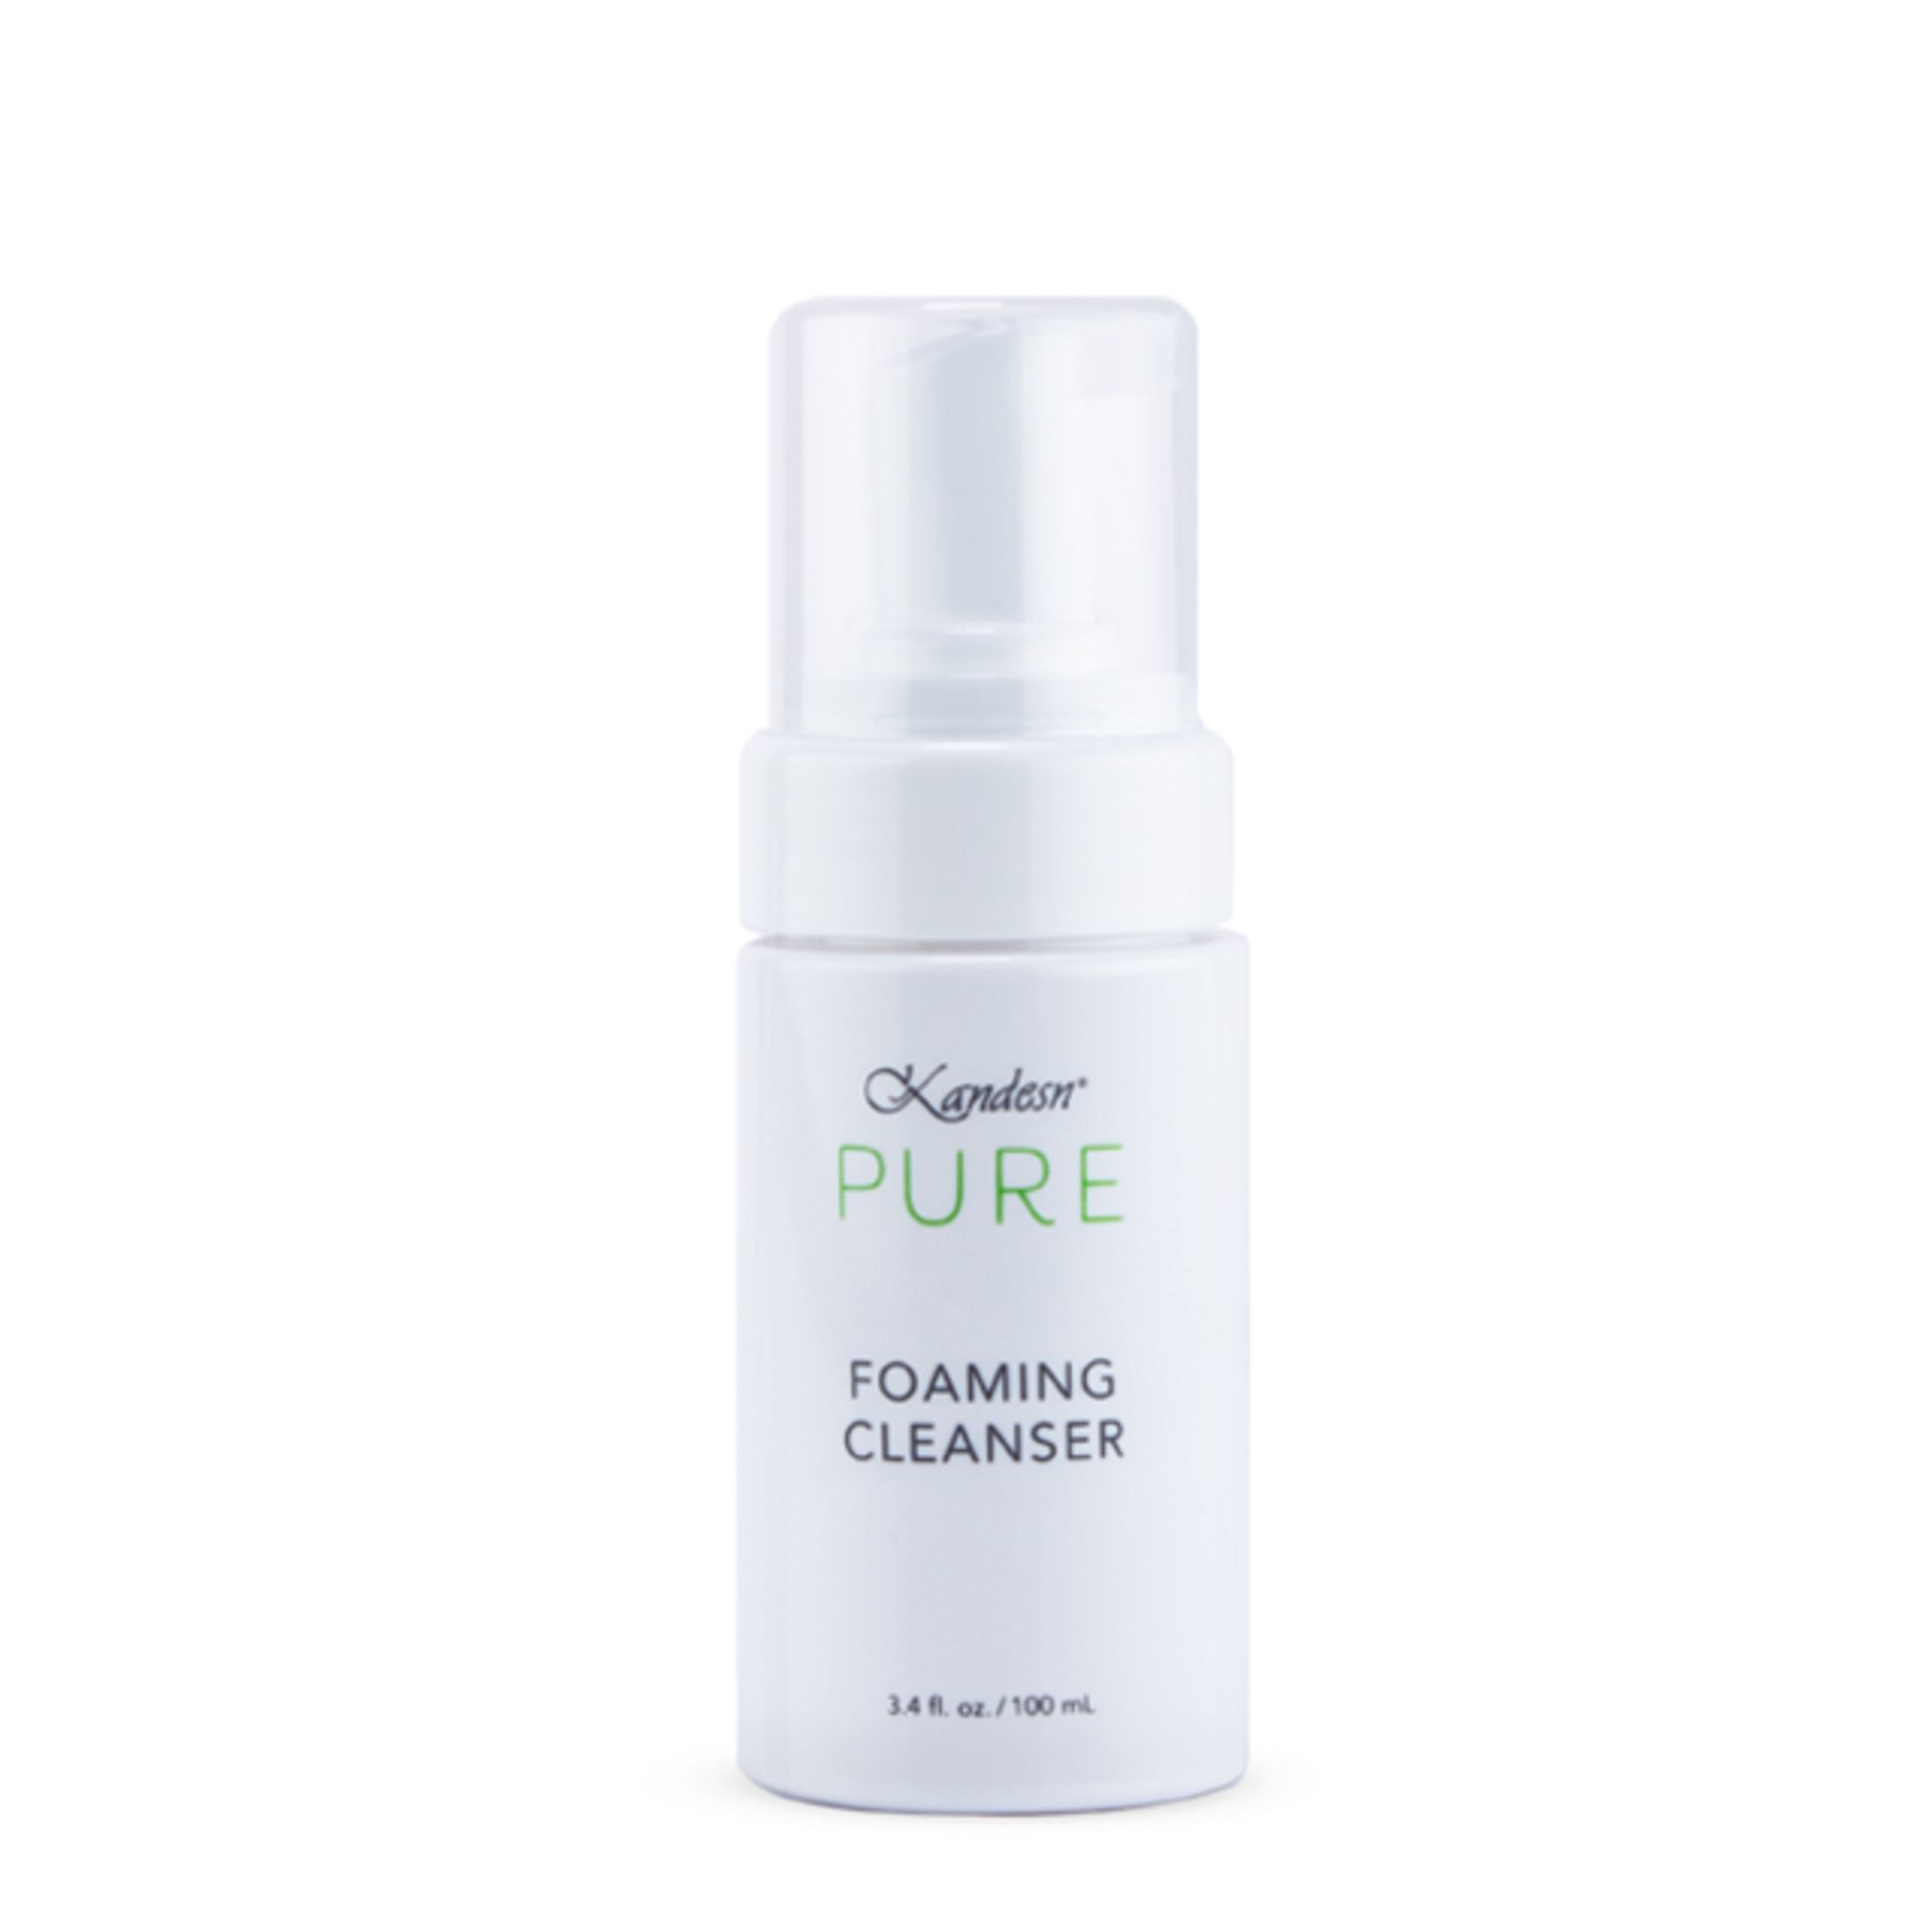 Kandesn® Pure Foaming Cleanser 100 mL/3.4 oz.